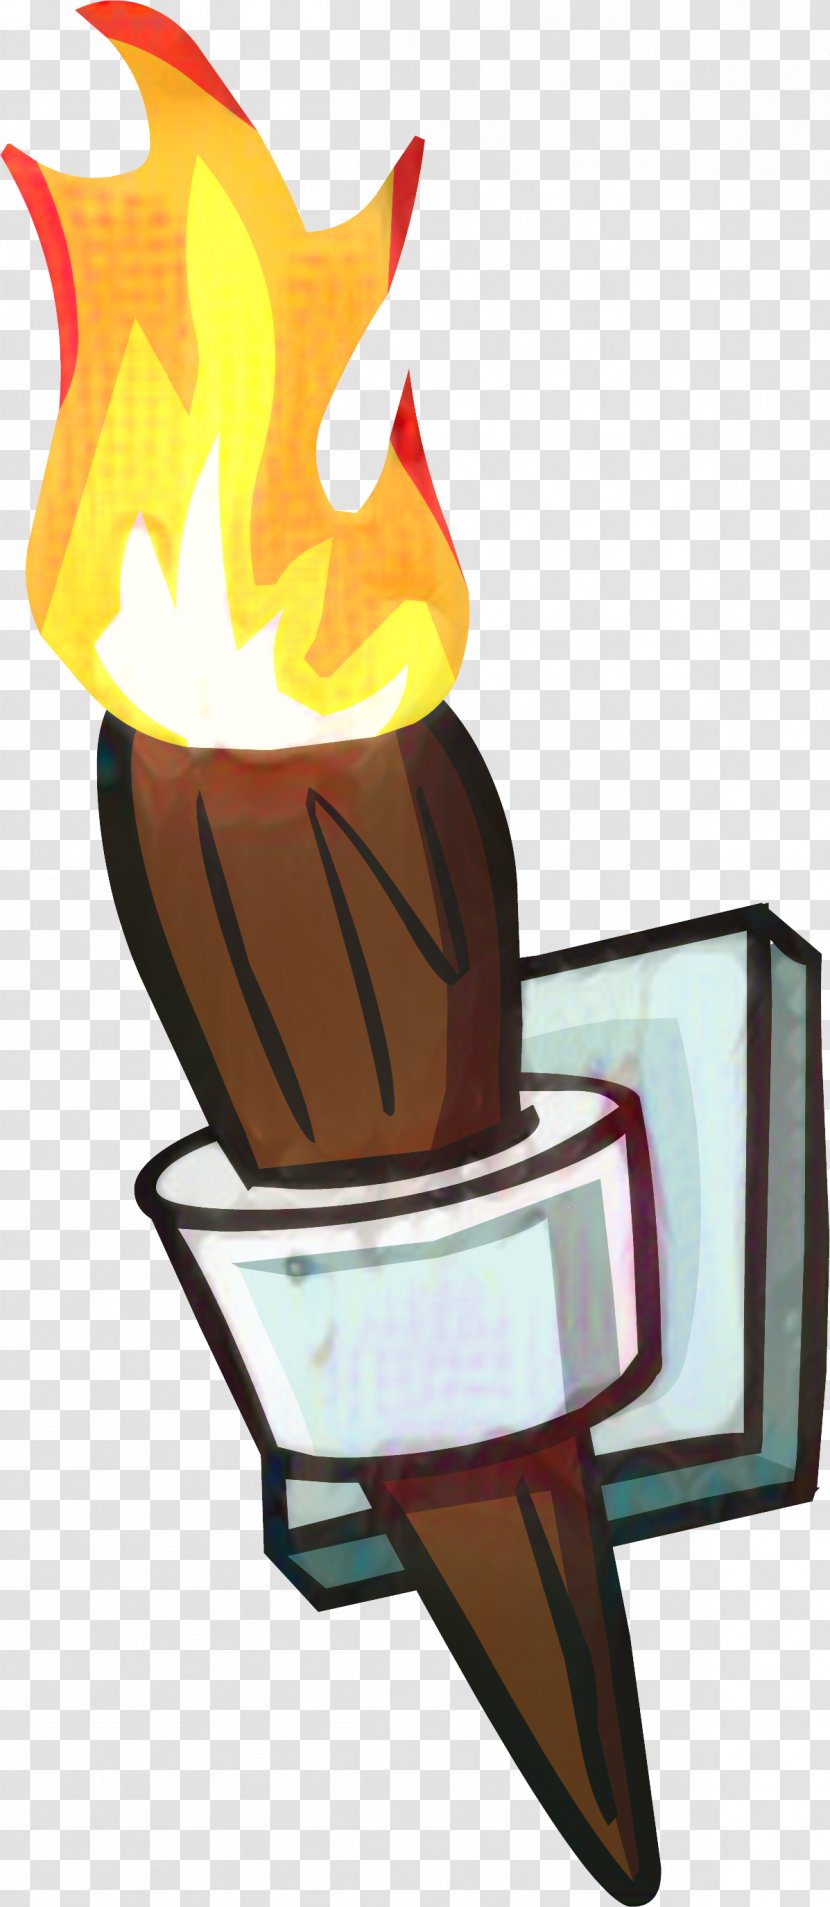 Clip Art Transparency Torch Vector Graphics - Flame - Flashlight Transparent PNG